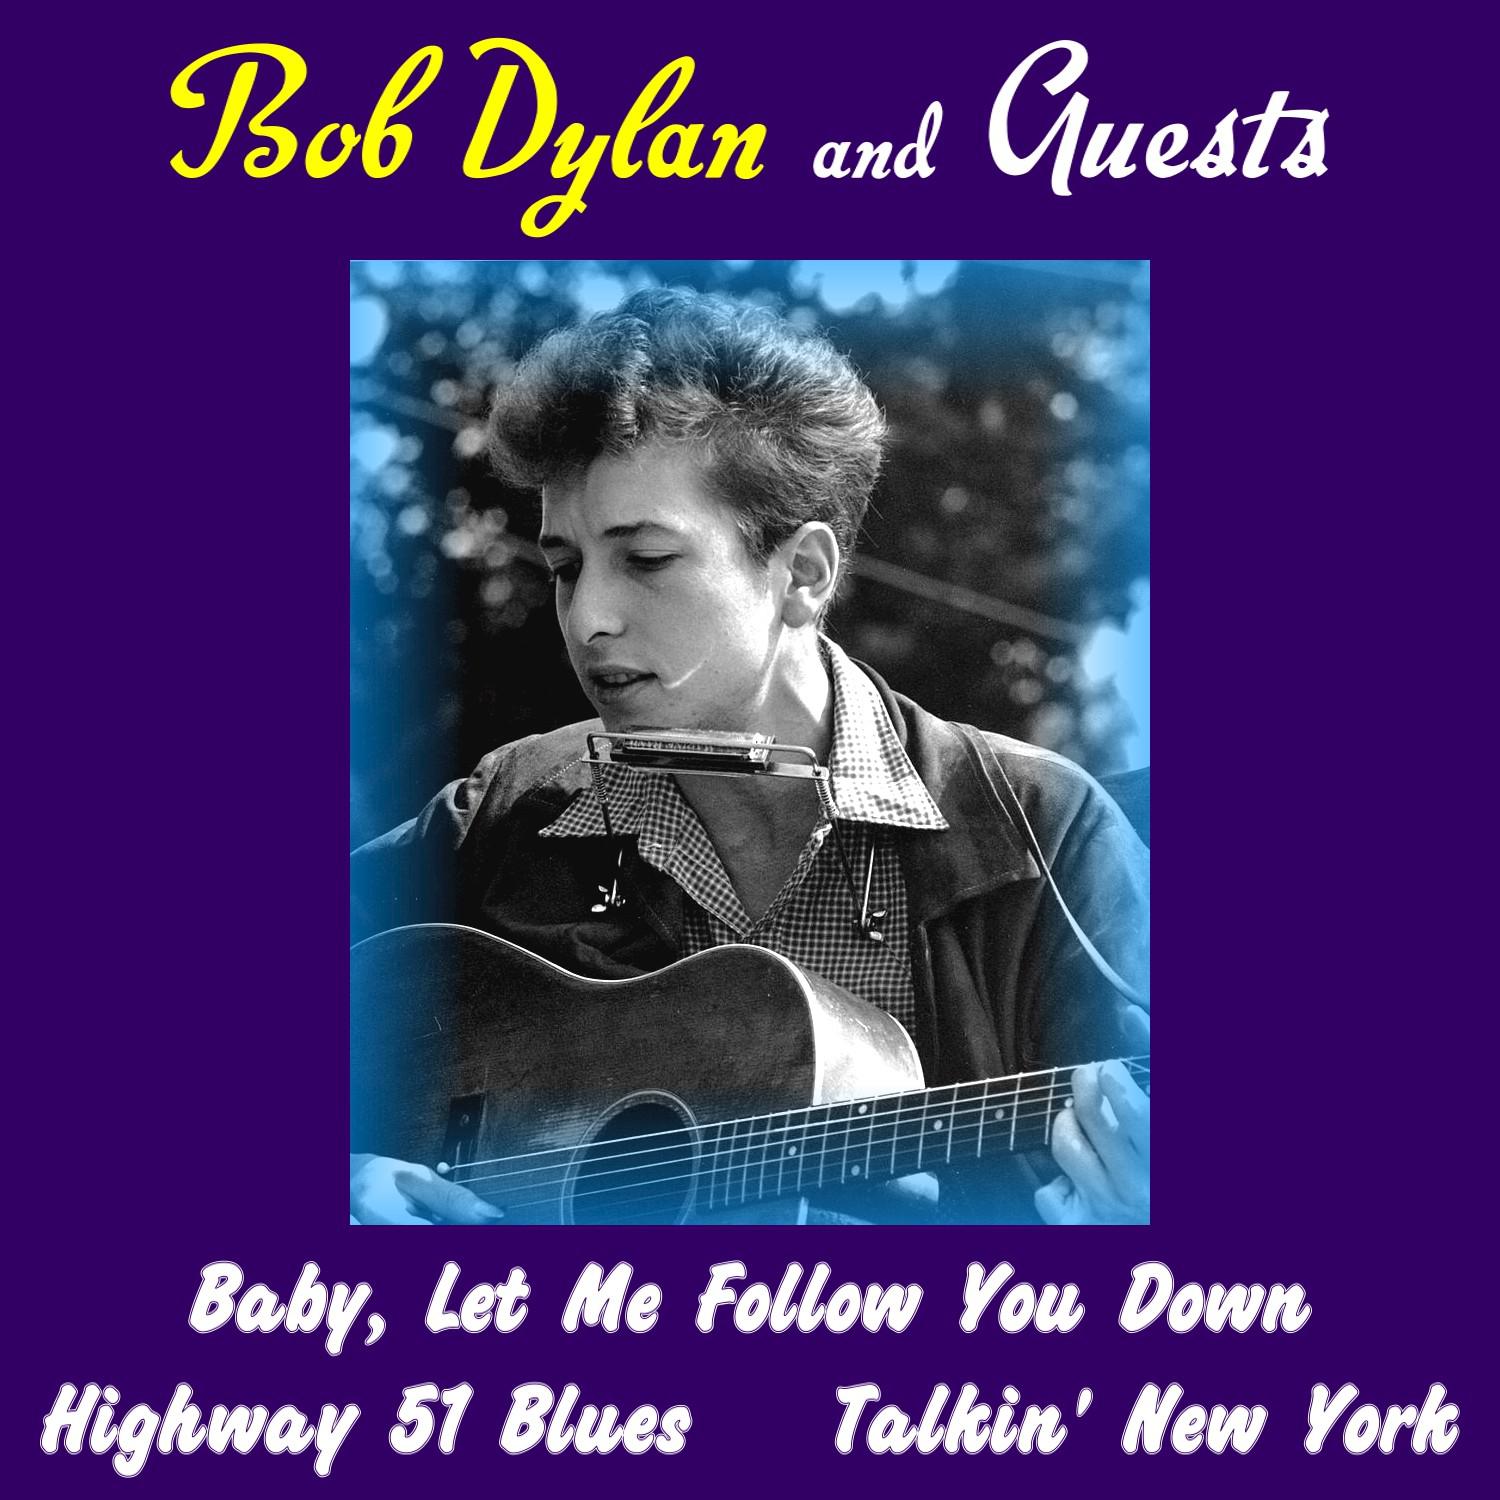 Bob Dylan and Guests